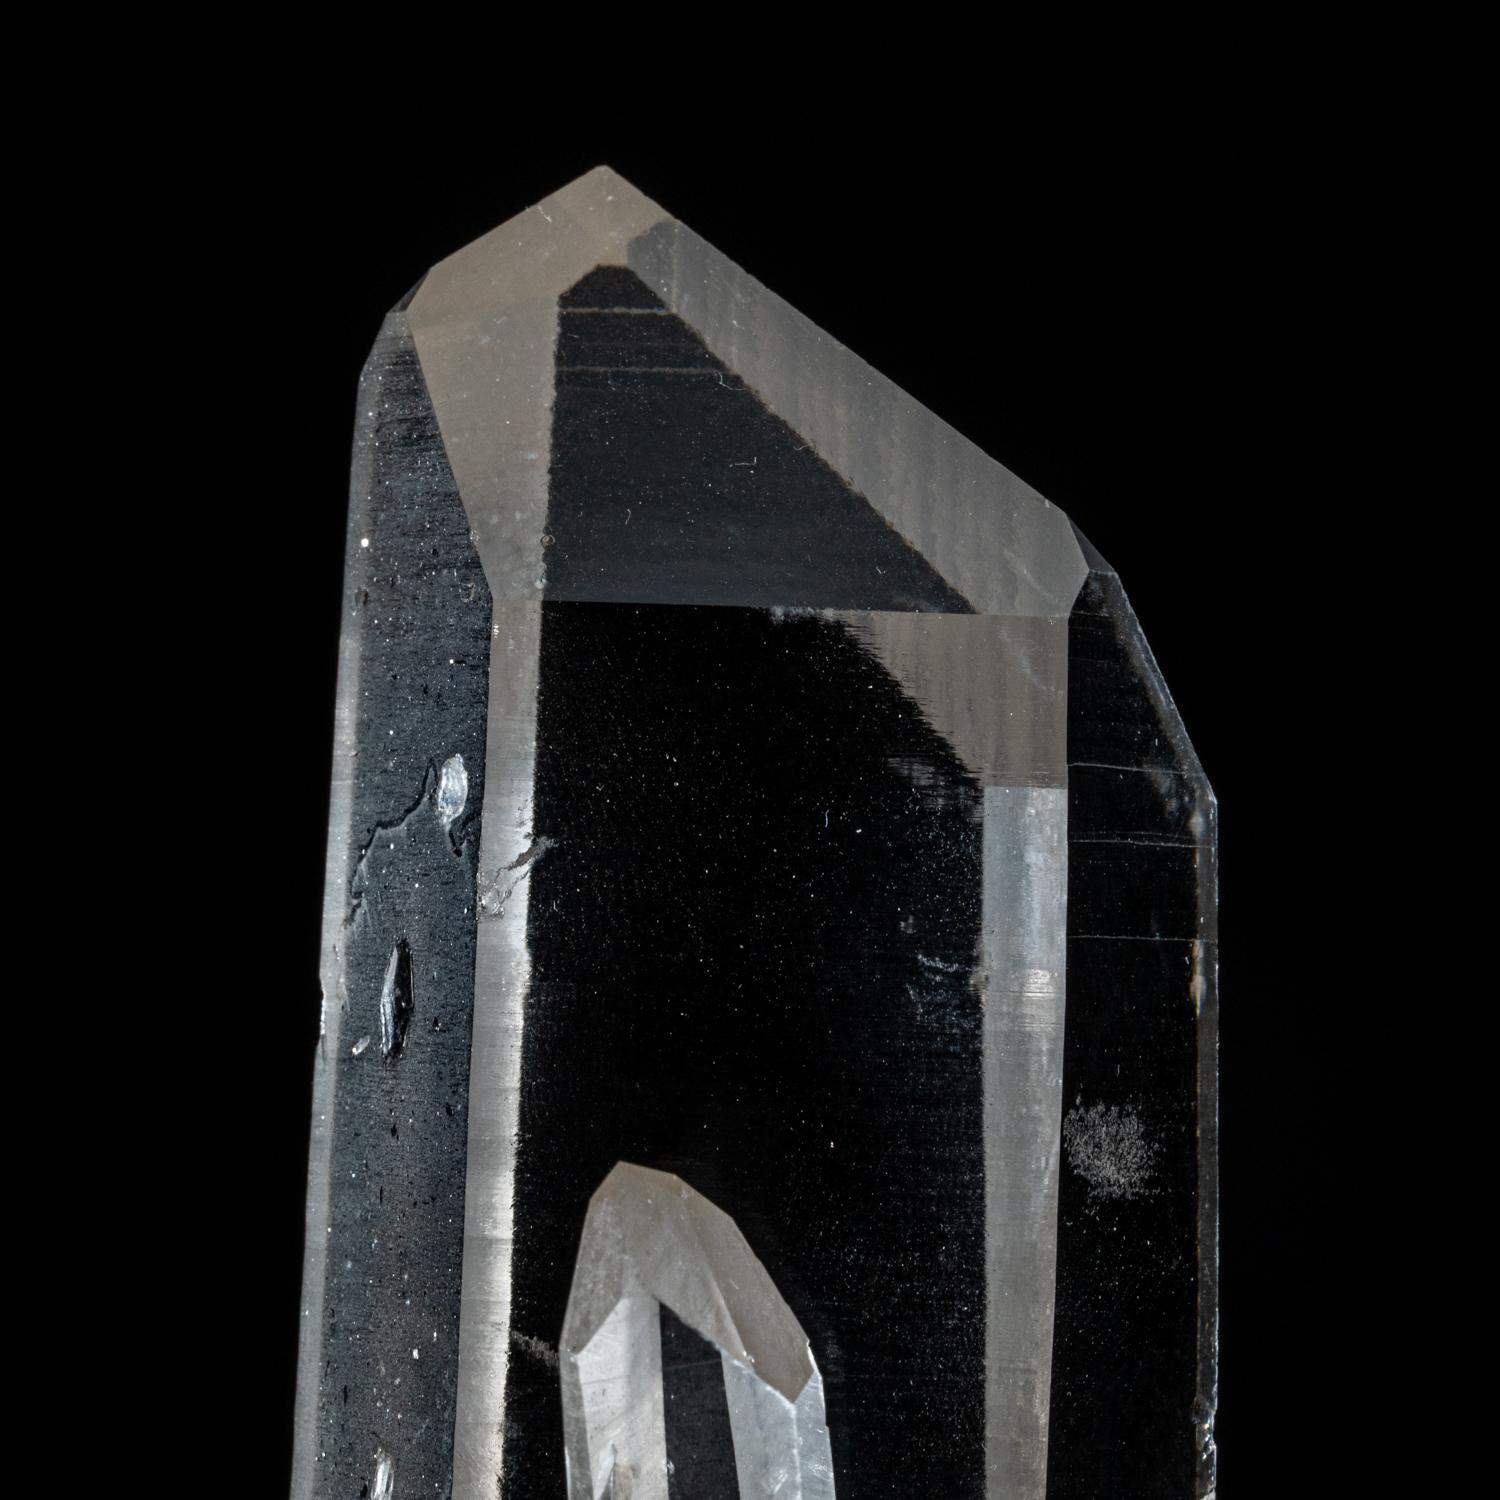 From Diamantina, Minas Gerais, Brazil

Large transparent colorless quartz crystals with surfaces composed of many smaller parallel crystal faces. Internally the quartz id highly transparent with scattered flaws.

 You will receive the exact object